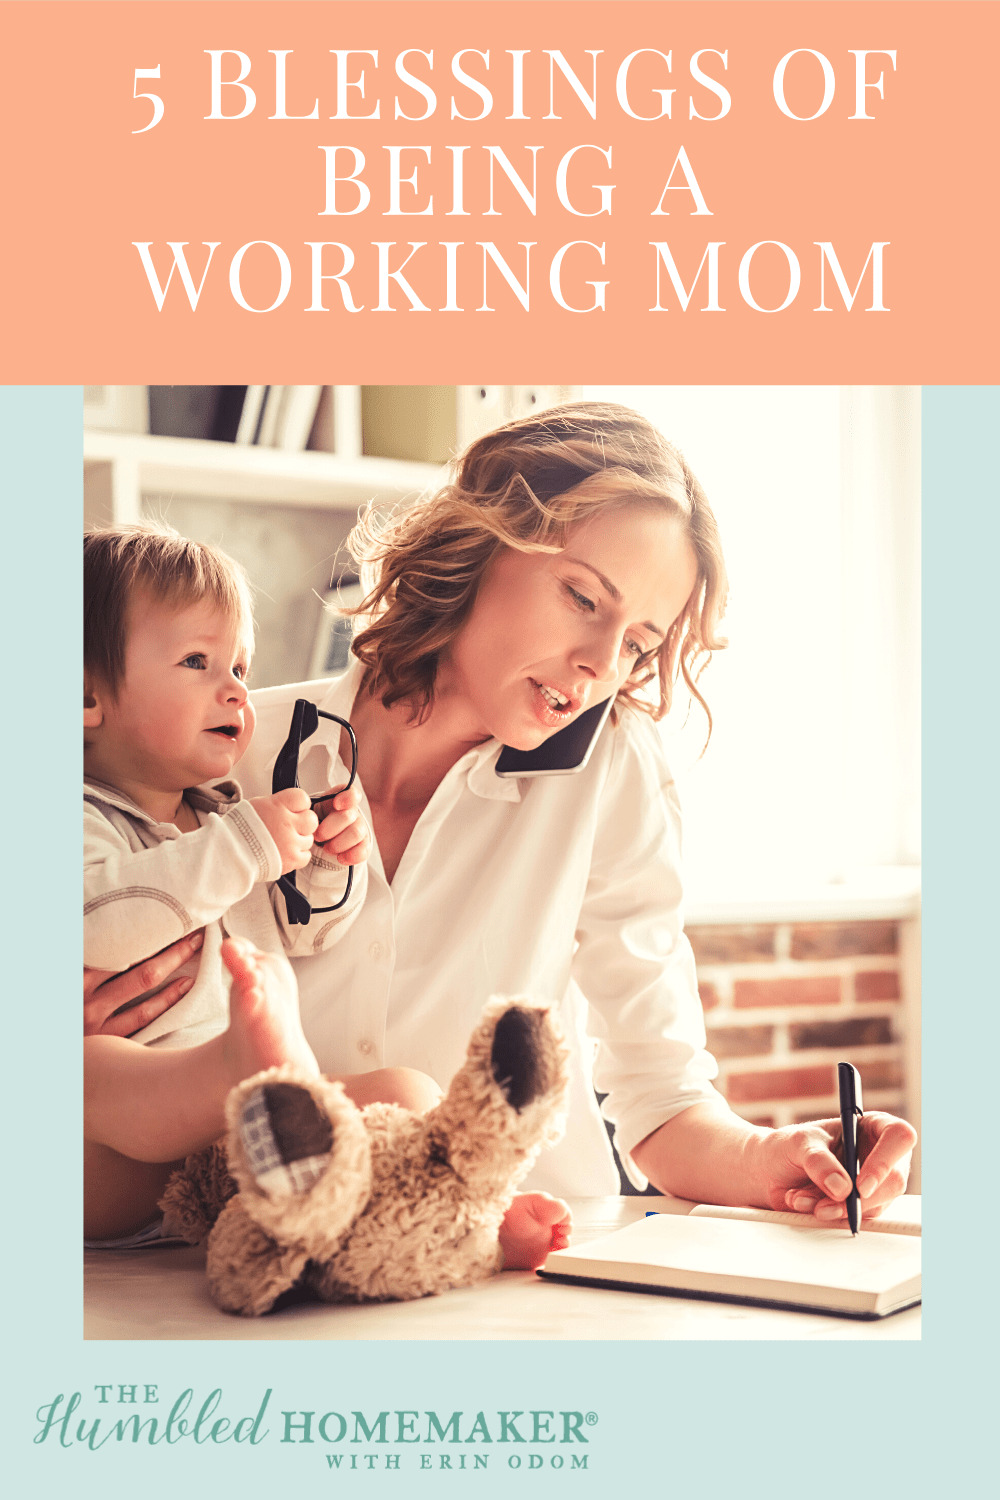 Here’s some encouragement for all you working moms out there! If you want to stay home with your kids, here’s encouragement and advice–plus a look at some of the blessings that come with your time in the workplace!